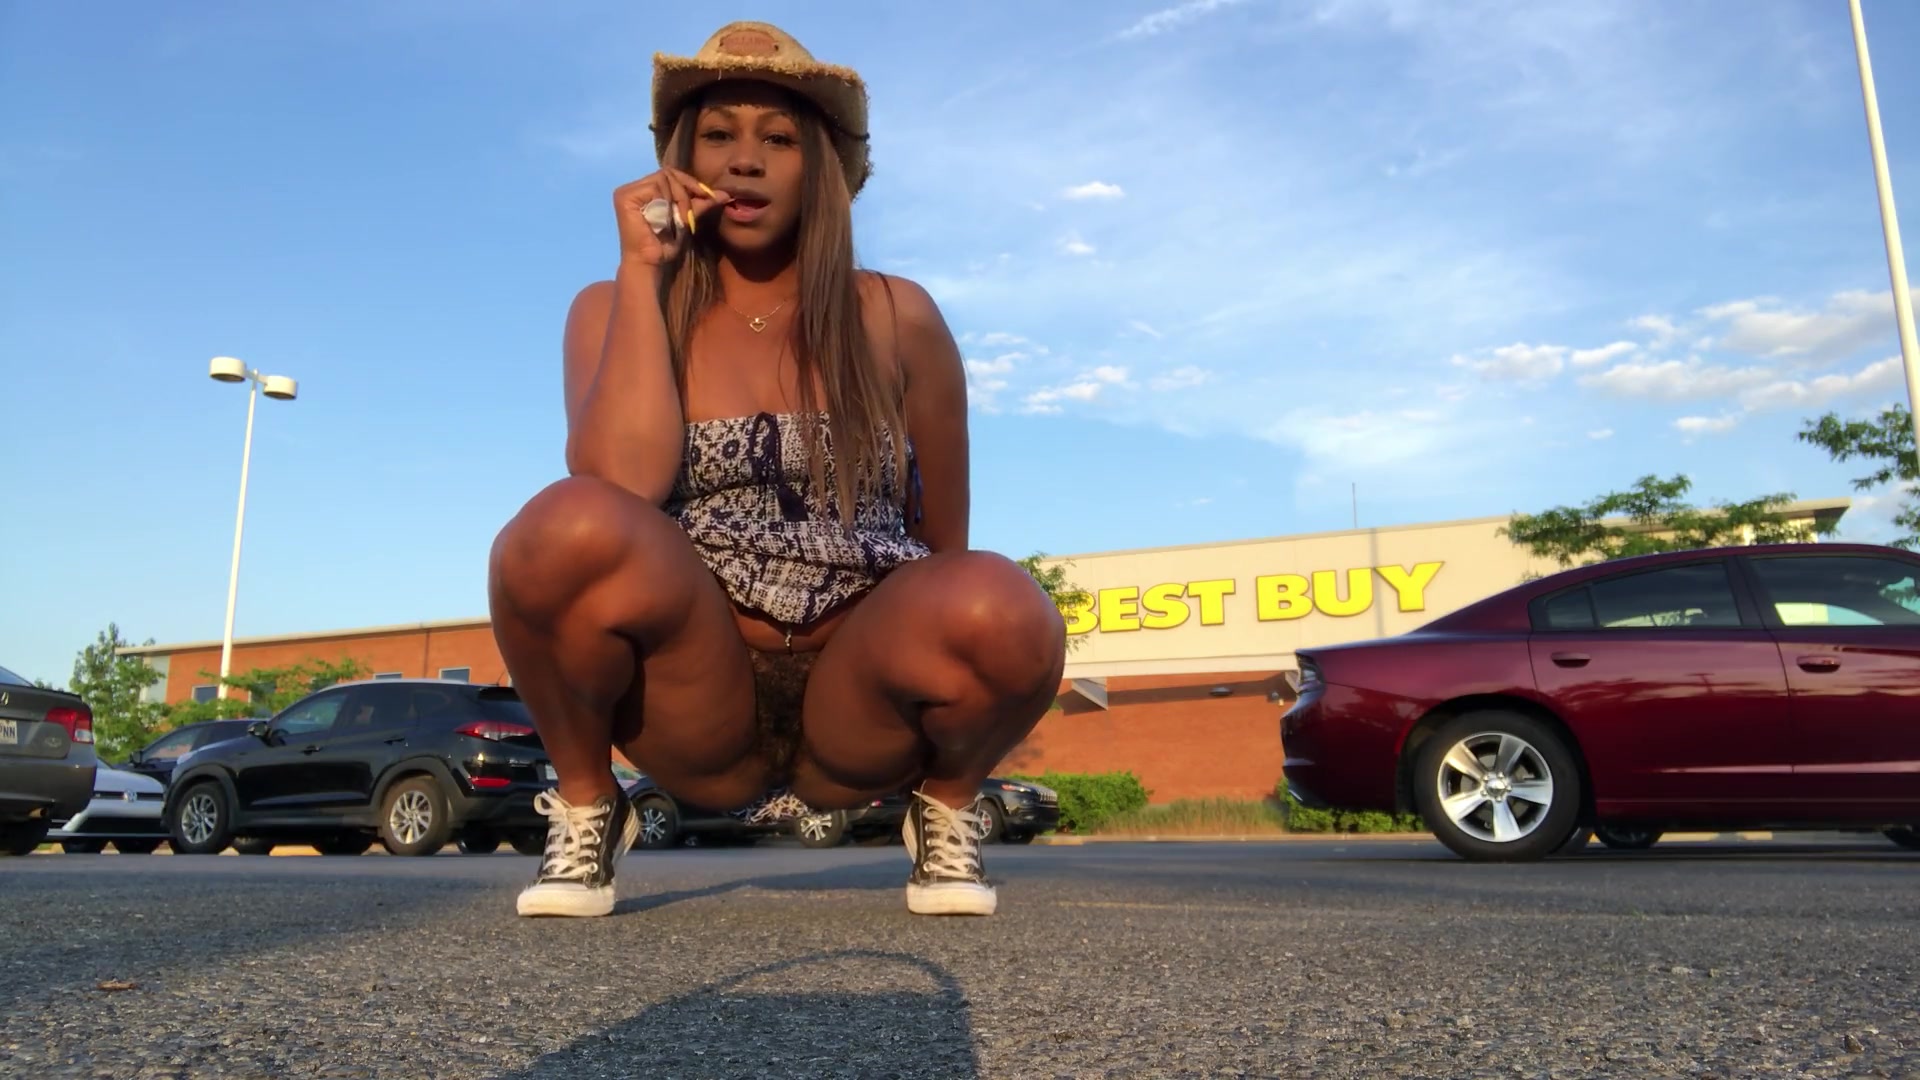 Ebony Girl flooding the BestBuy Perking Lot with her piss